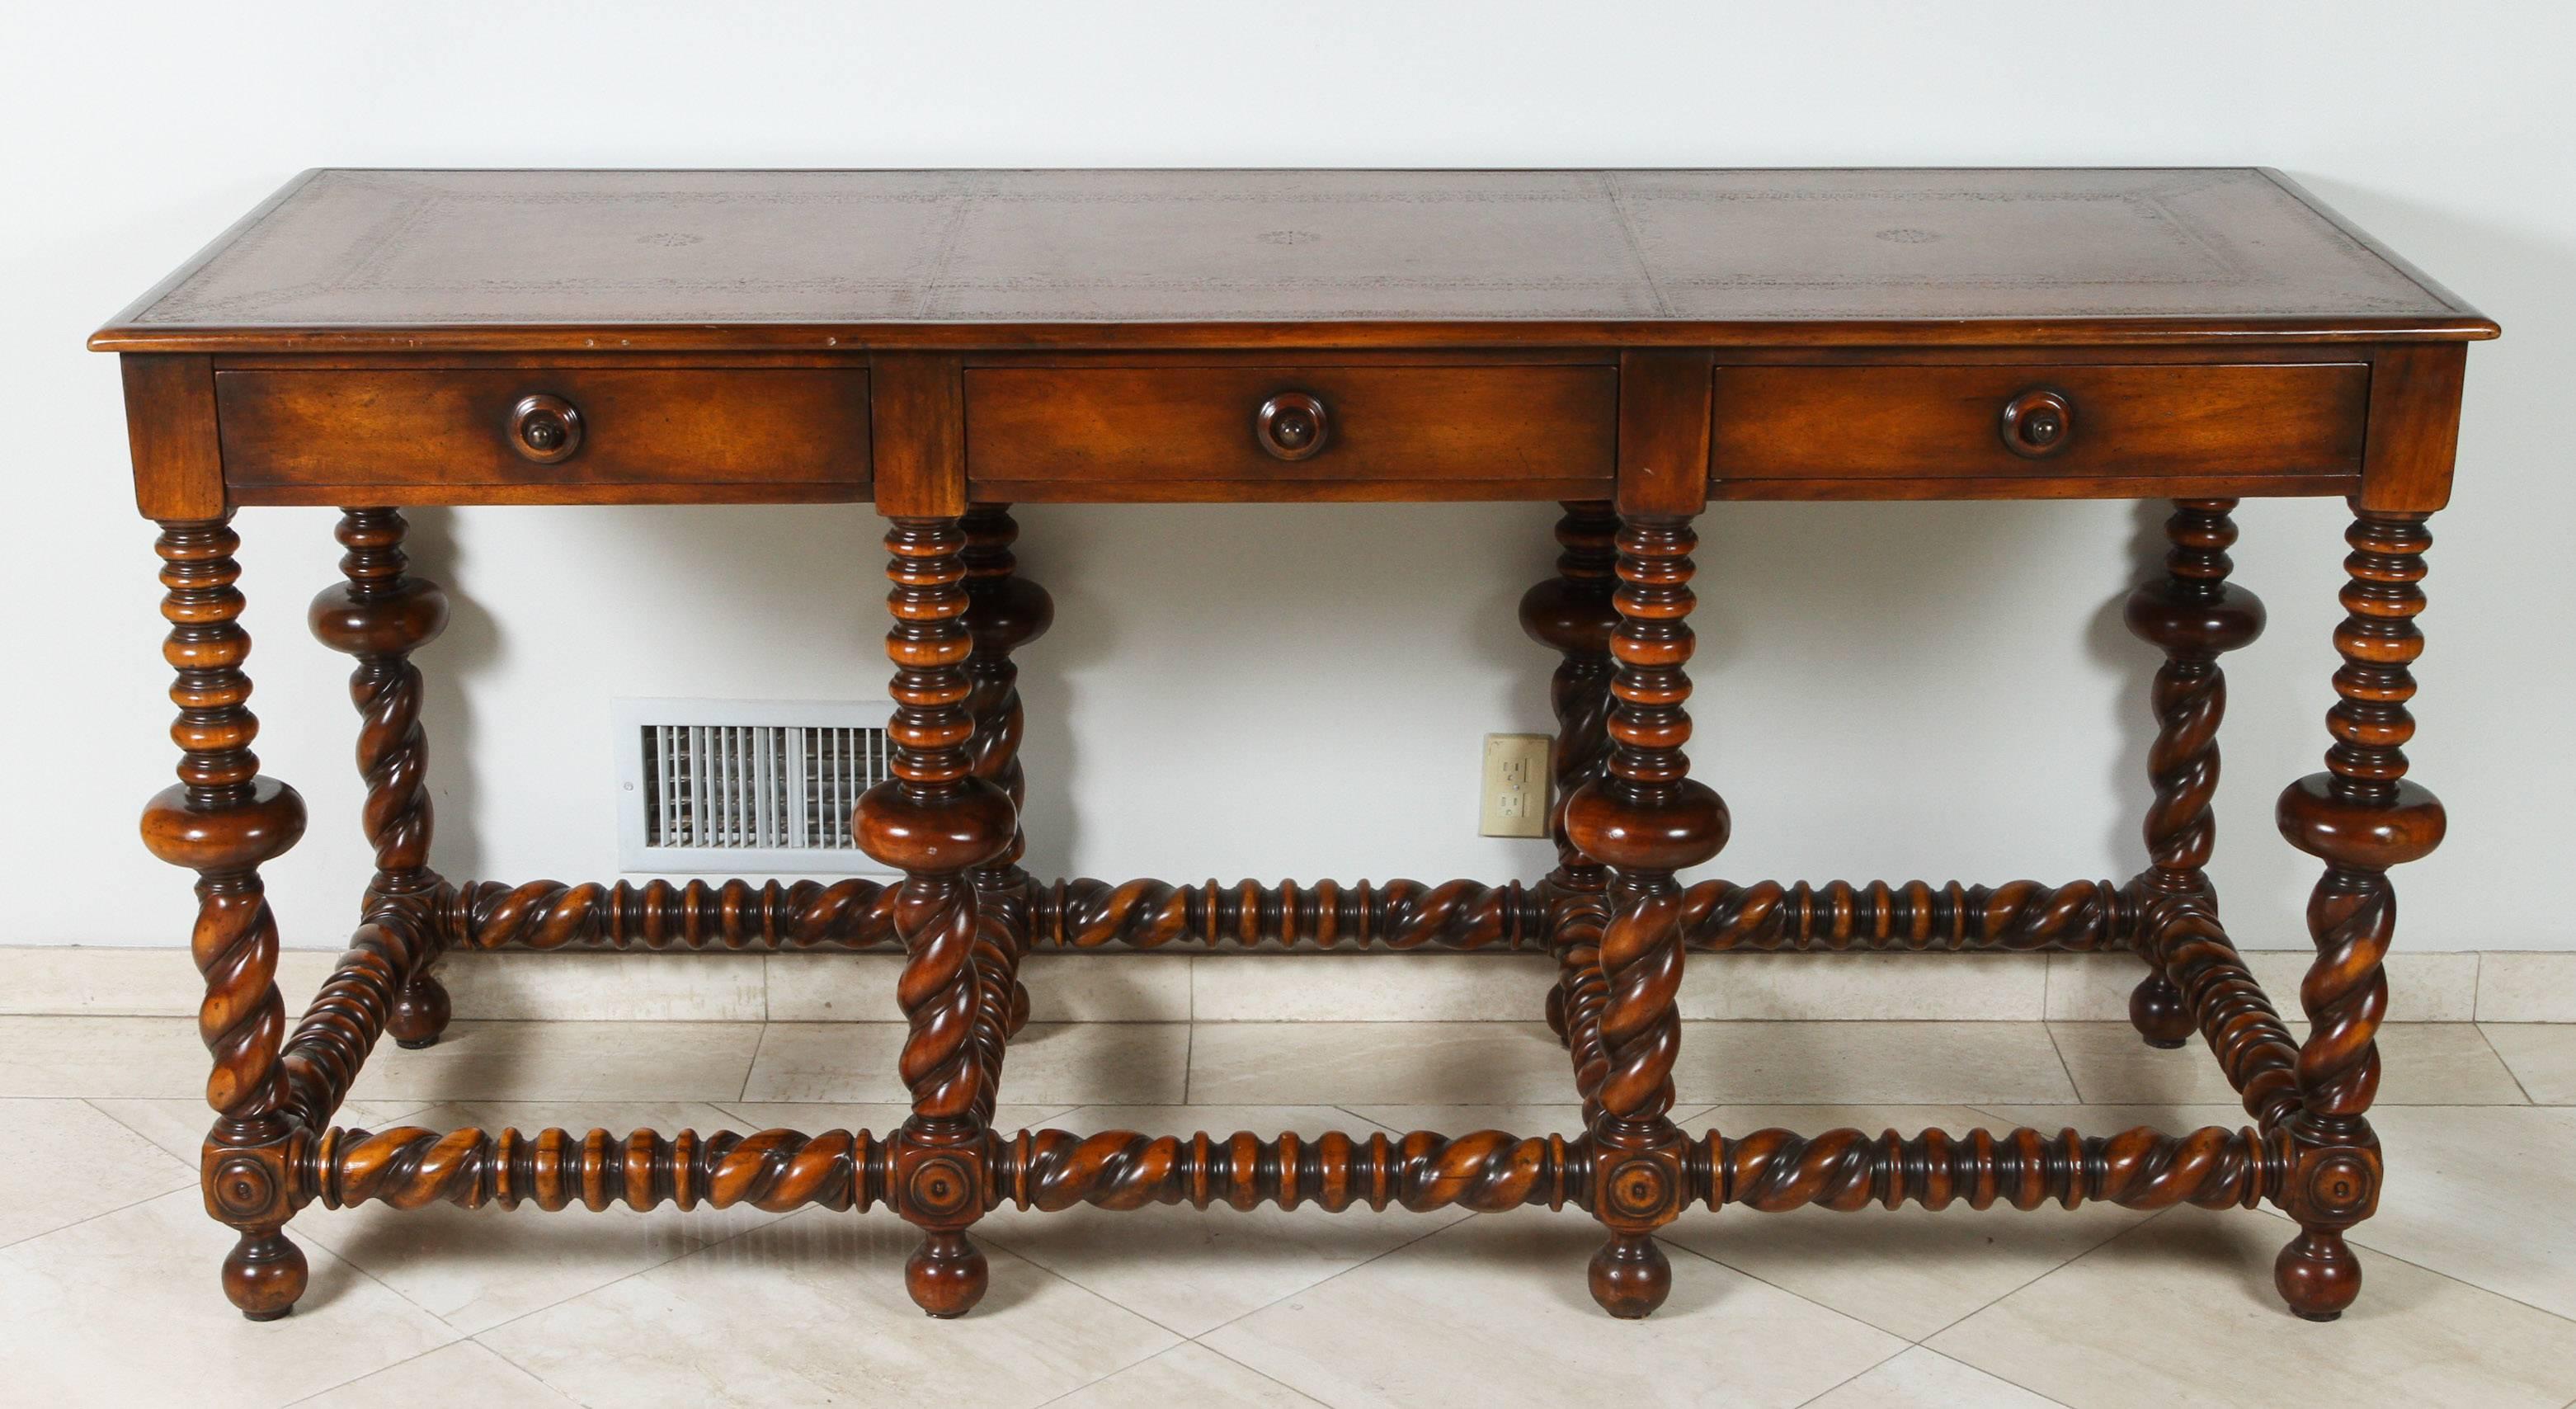 Monumental Portuguese style wooden console table with leather top.
Portuguese style polished and carved wood table with circular and bulbous designed twisted legs and stretcher, top is leather covered with beveled edge with three deep set drawers